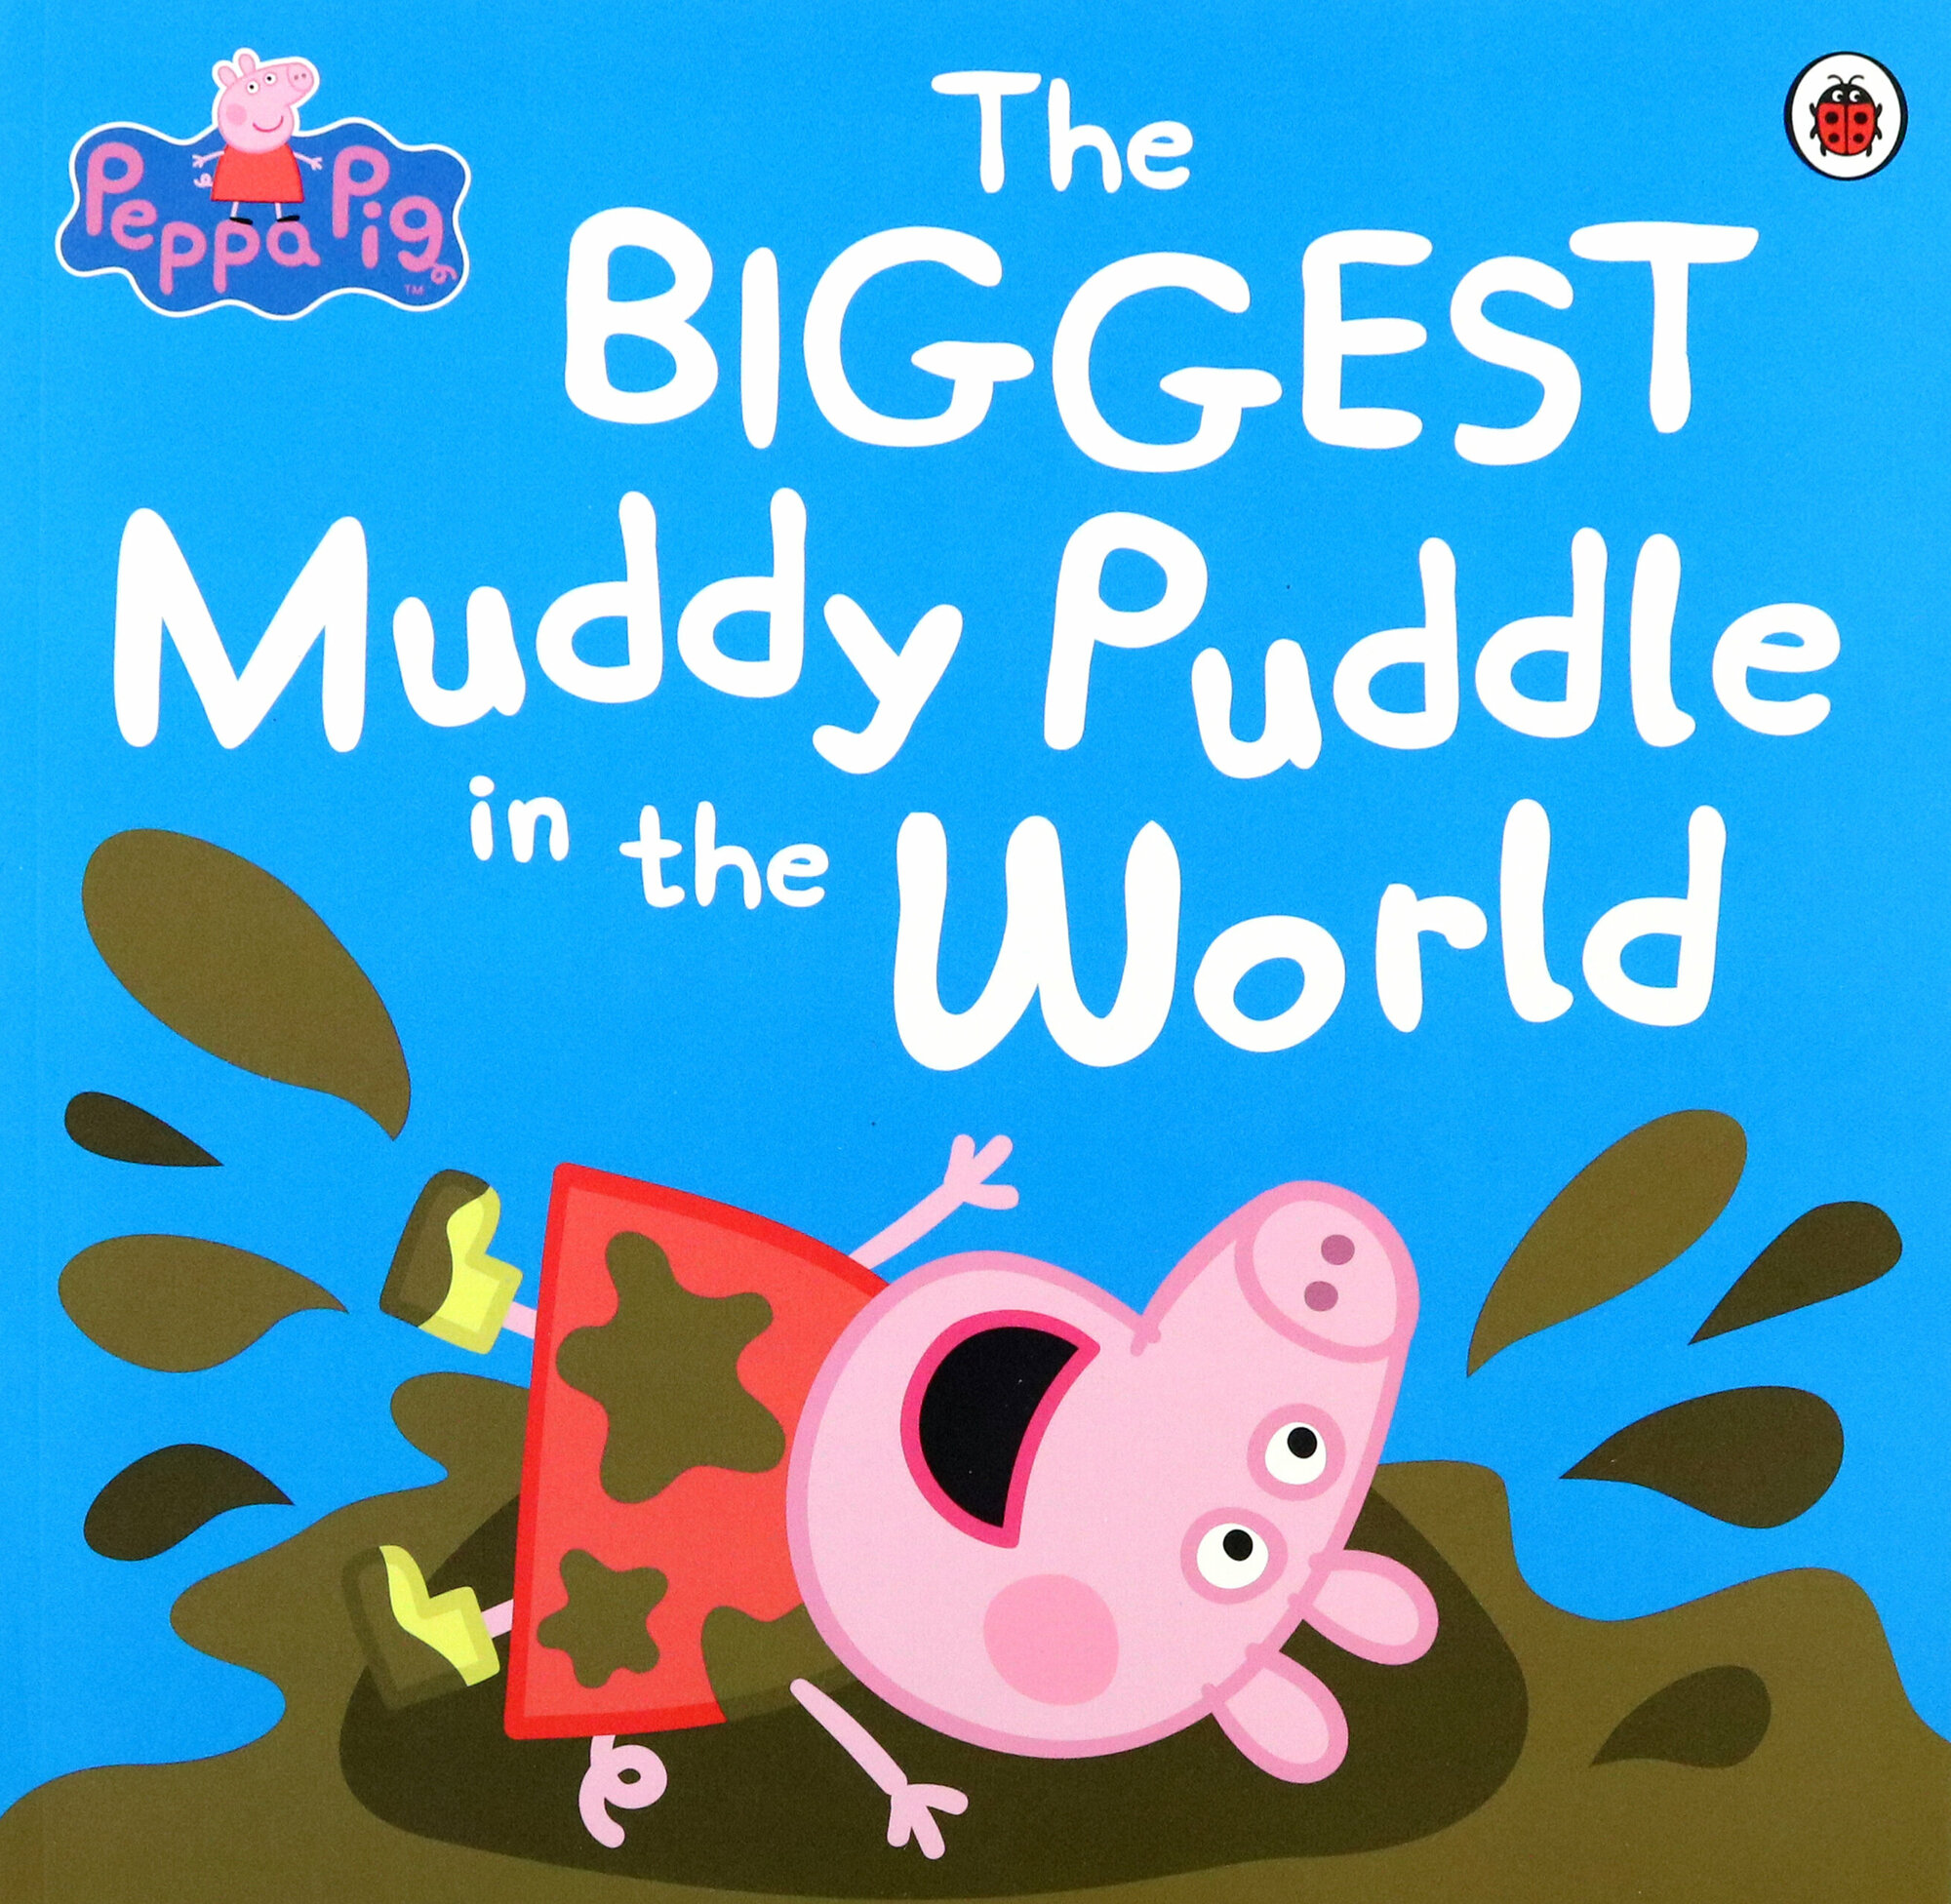 Peppa Pig. The Biggest Muddy Puddle in the World - фото №4